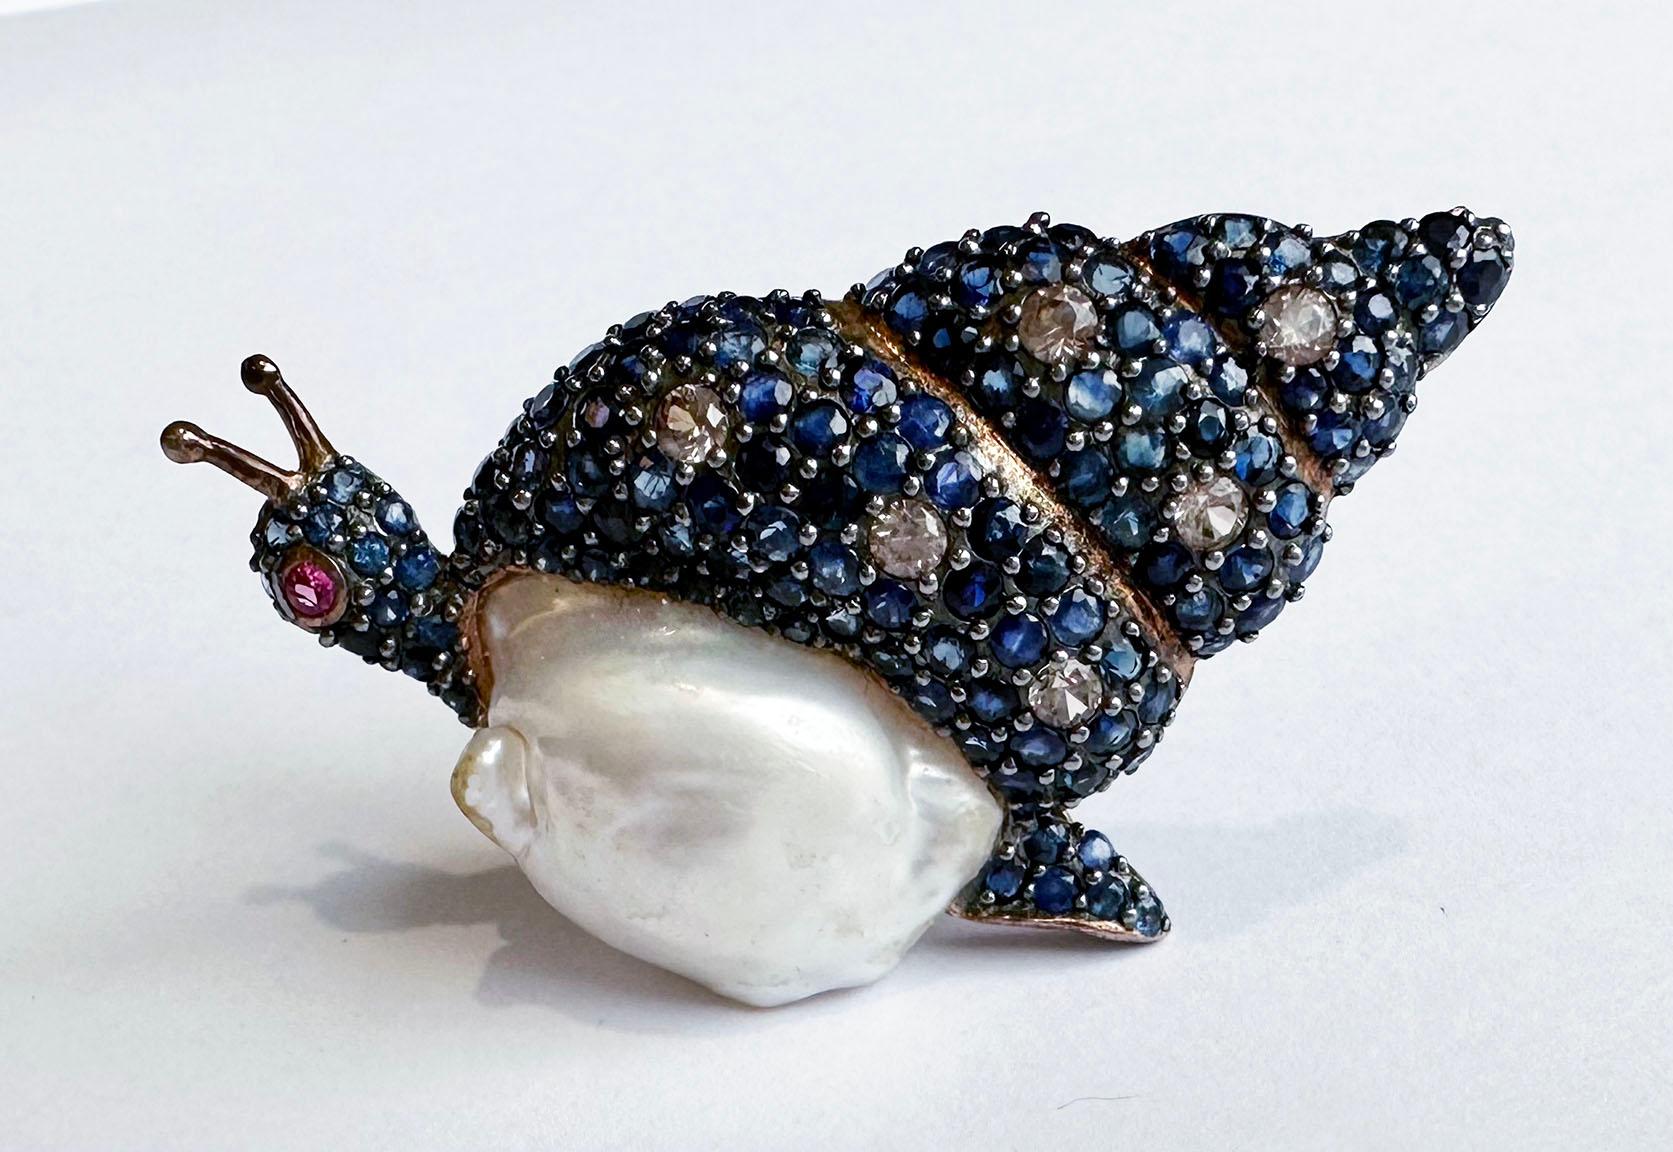 Blackened and Rose Gold Plated Silver Snail Brooch/Pendant For Sale 4